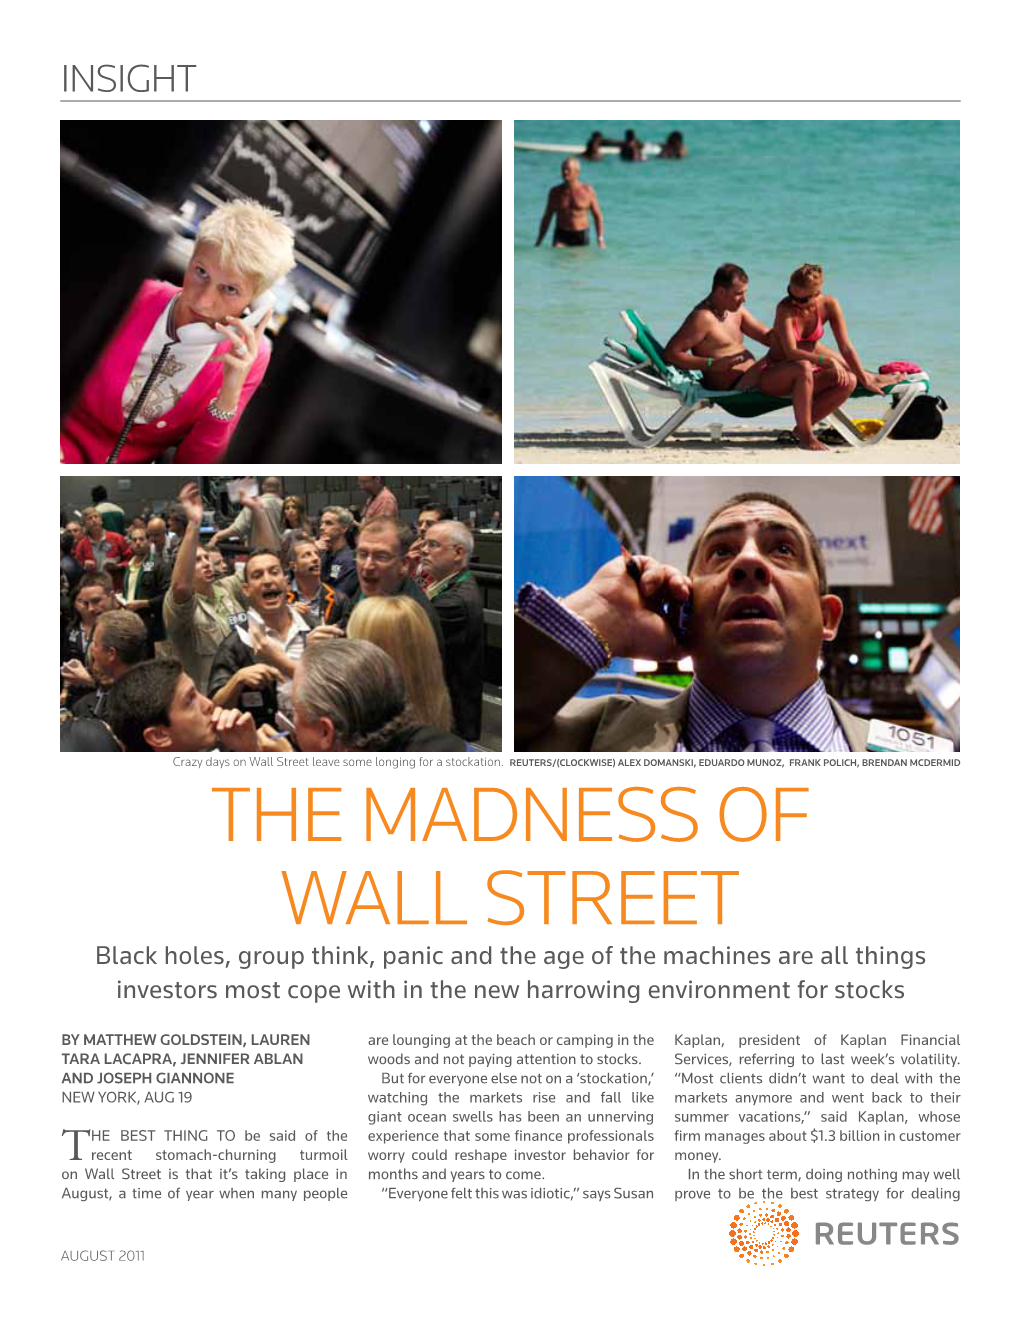 The Madness of Wall Street